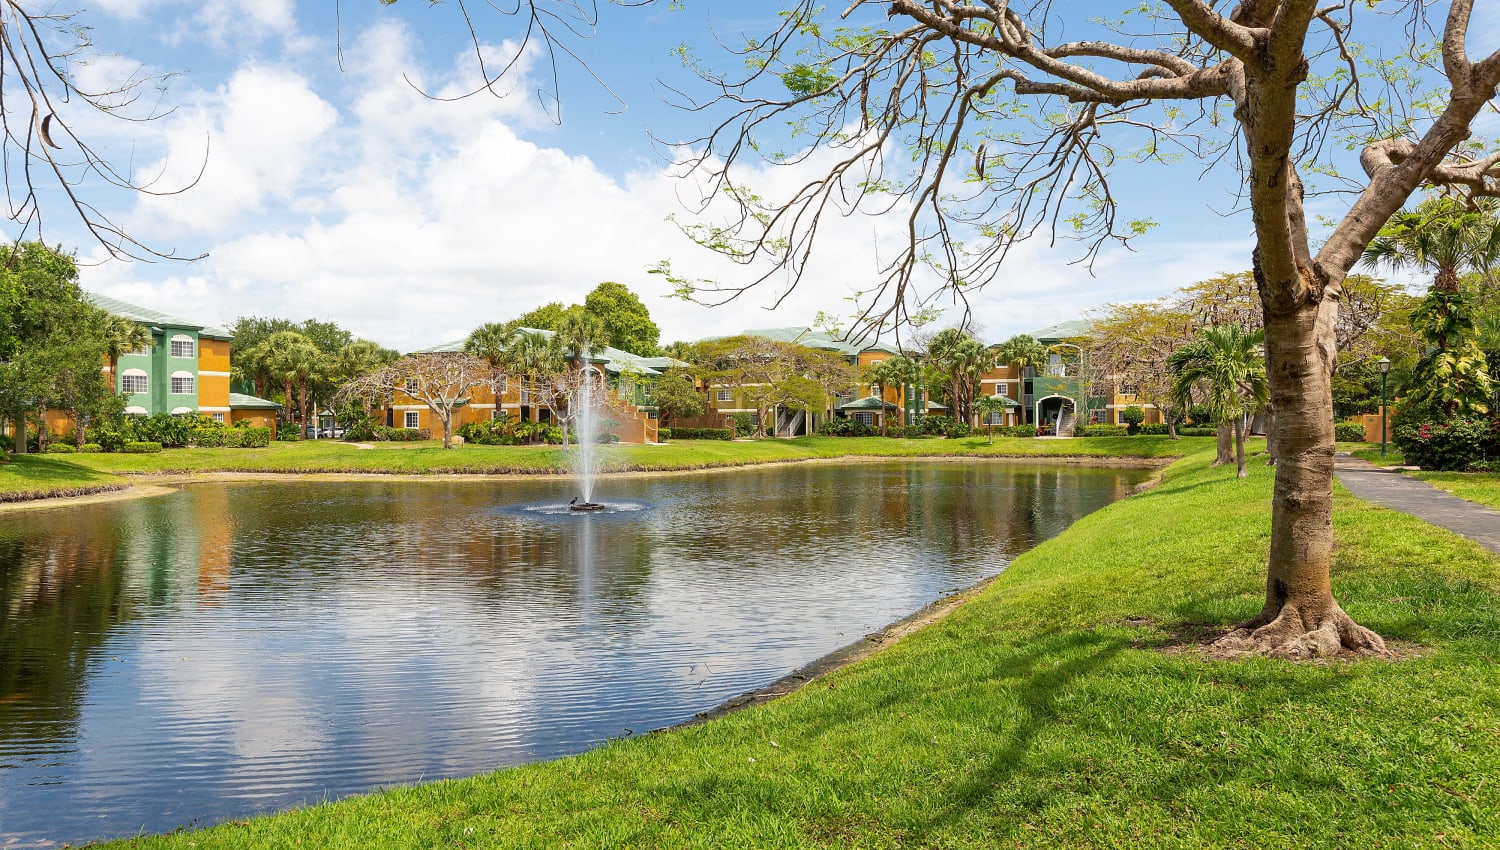 Lakefront area at Sanctuary Cove Apartments in West Palm Beach, Florida